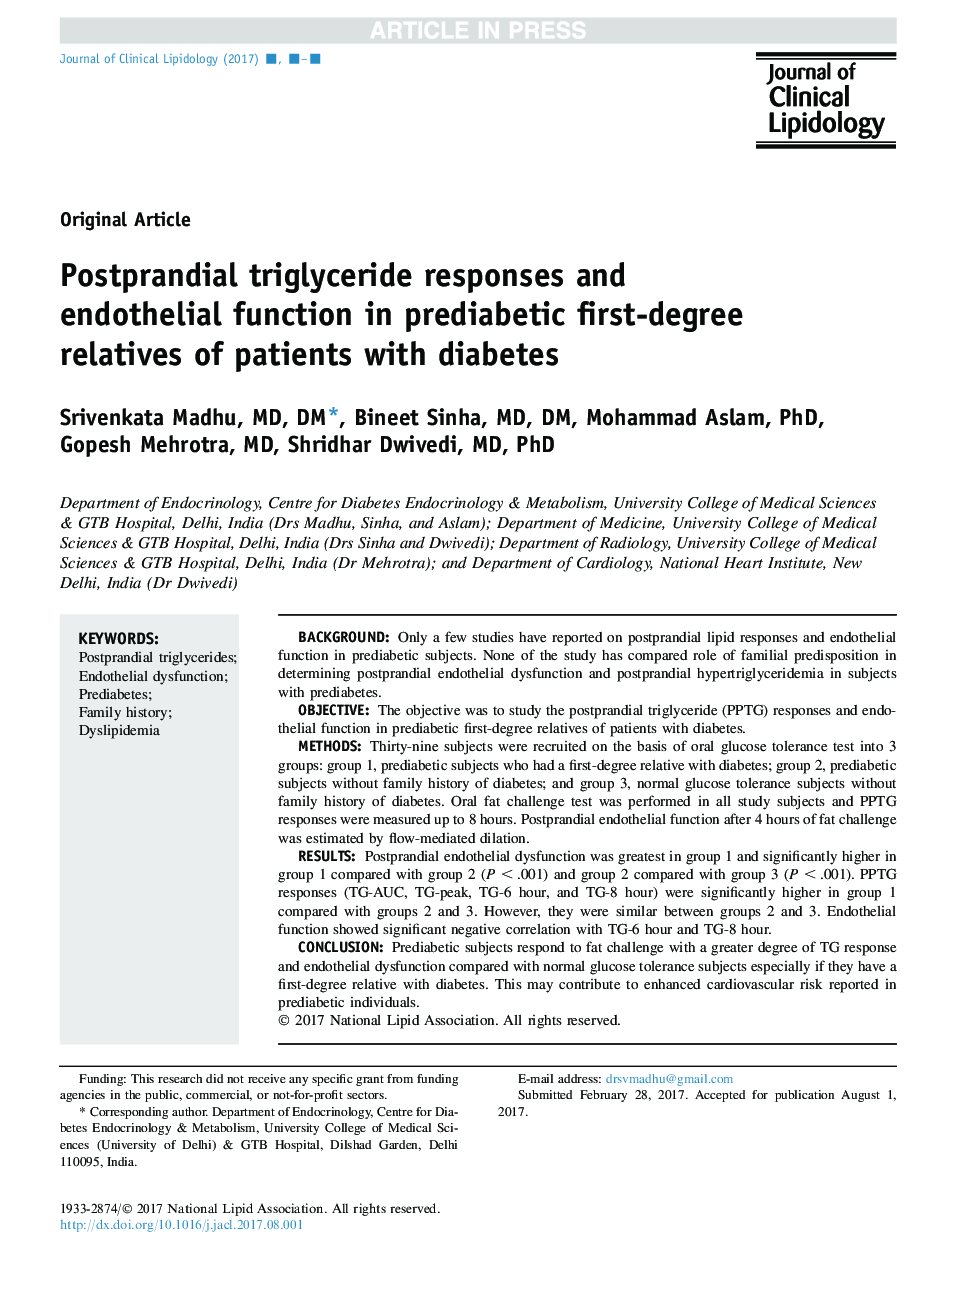 Postprandial triglyceride responses and endothelial function in prediabetic first-degree relatives of patients with diabetes